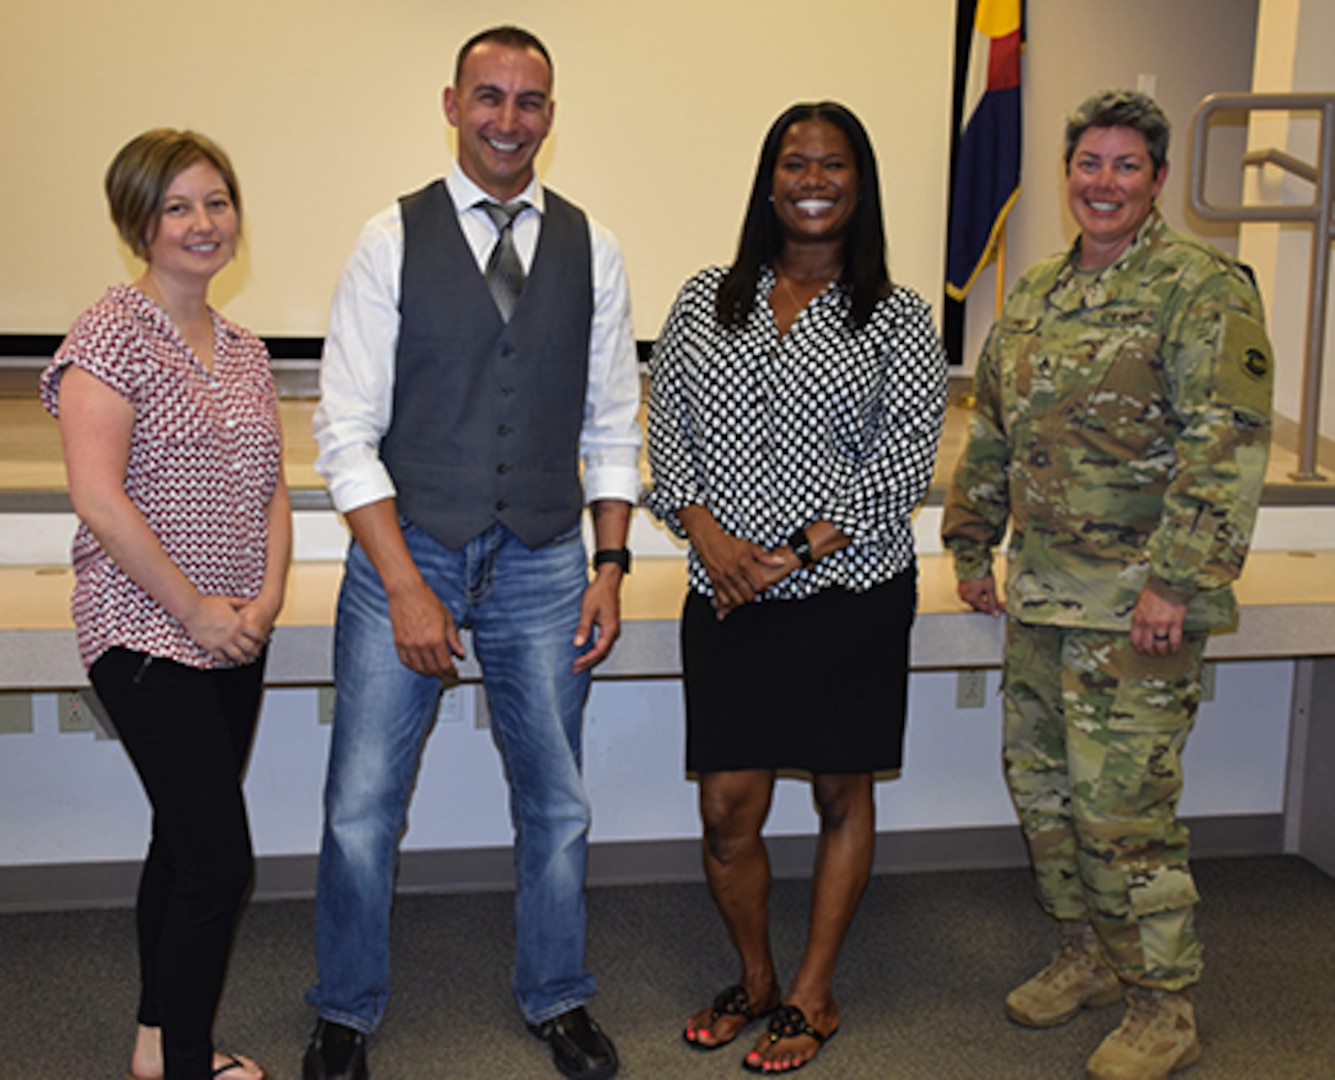 ​The Colorado National Guard's Equal Opportunity Advisors and Sexual Assault Response Coordinators gathered at Joint Force Headquarters in Centennial, Colorado,  July 21, 2018, to discuss numerous sexual assault and equal opportunity policy changes within the Department of Defense. Some of the biggest changes included cyber misconduct and the inclusion of the Reserve component in new DOD policies